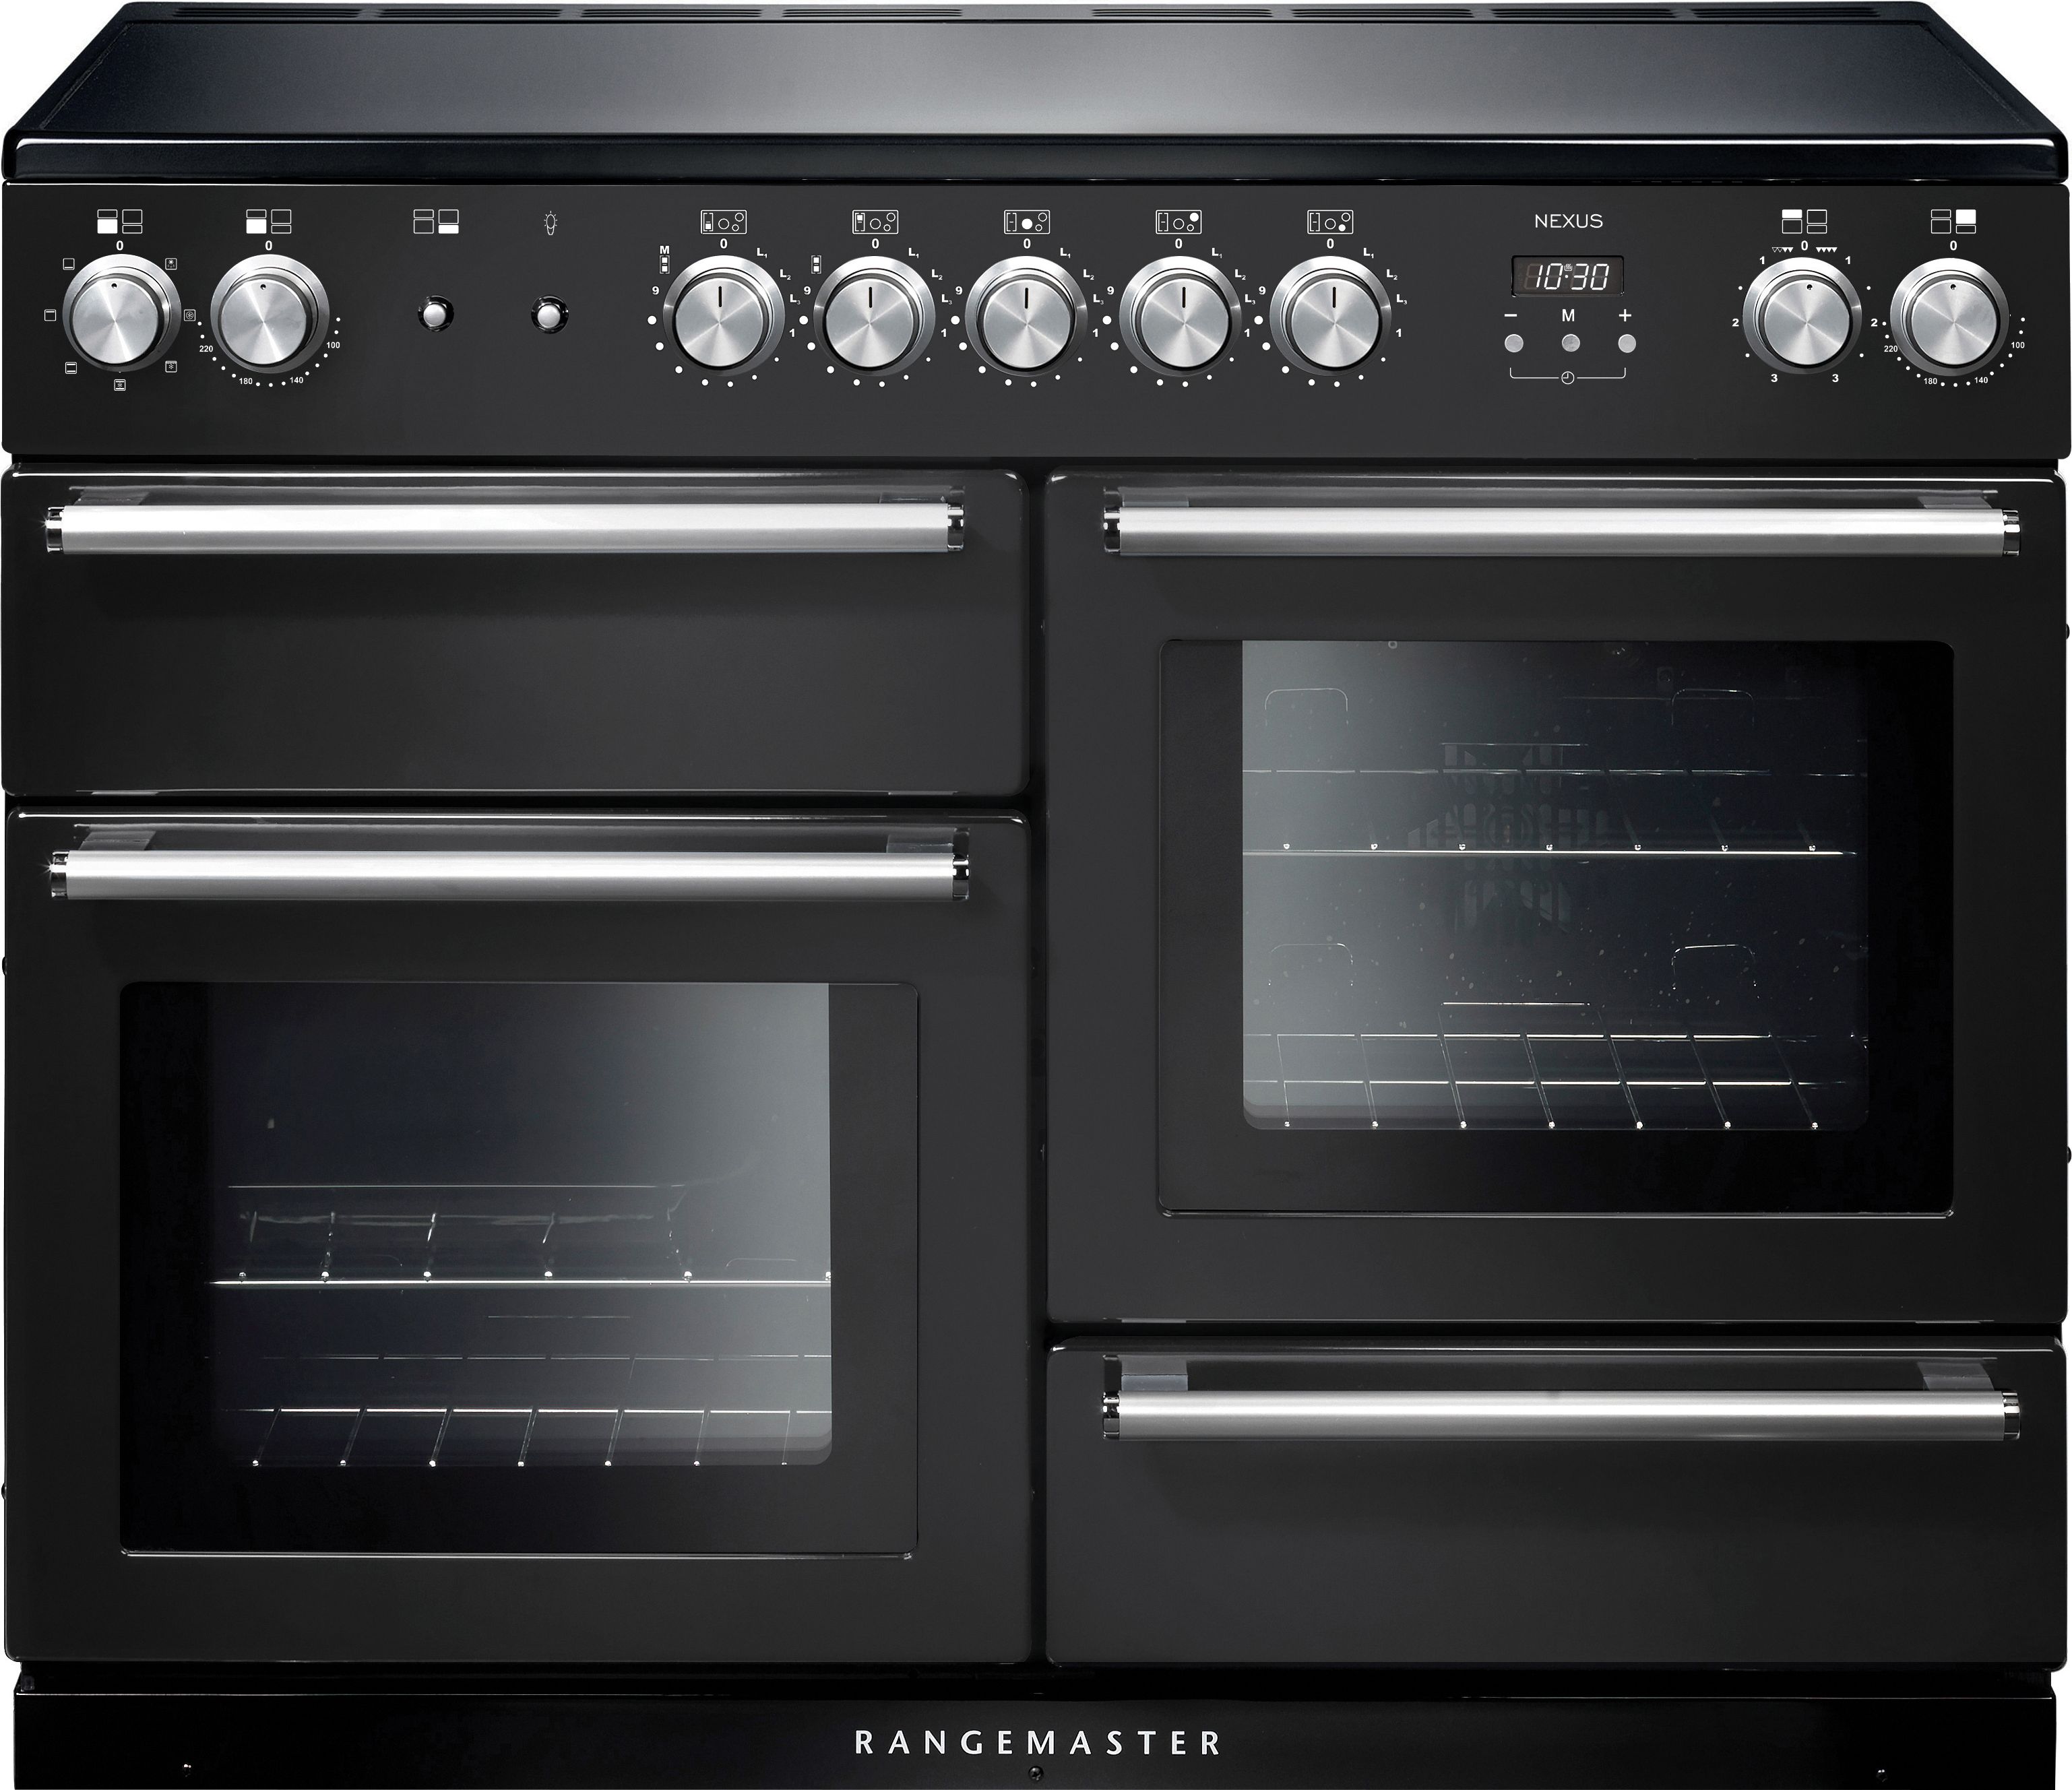 Rangemaster Nexus NEX110EICB/C 110cm Electric Range Cooker with Induction Hob - Charcoal Black - A/A/A Rated, Charcoal Black